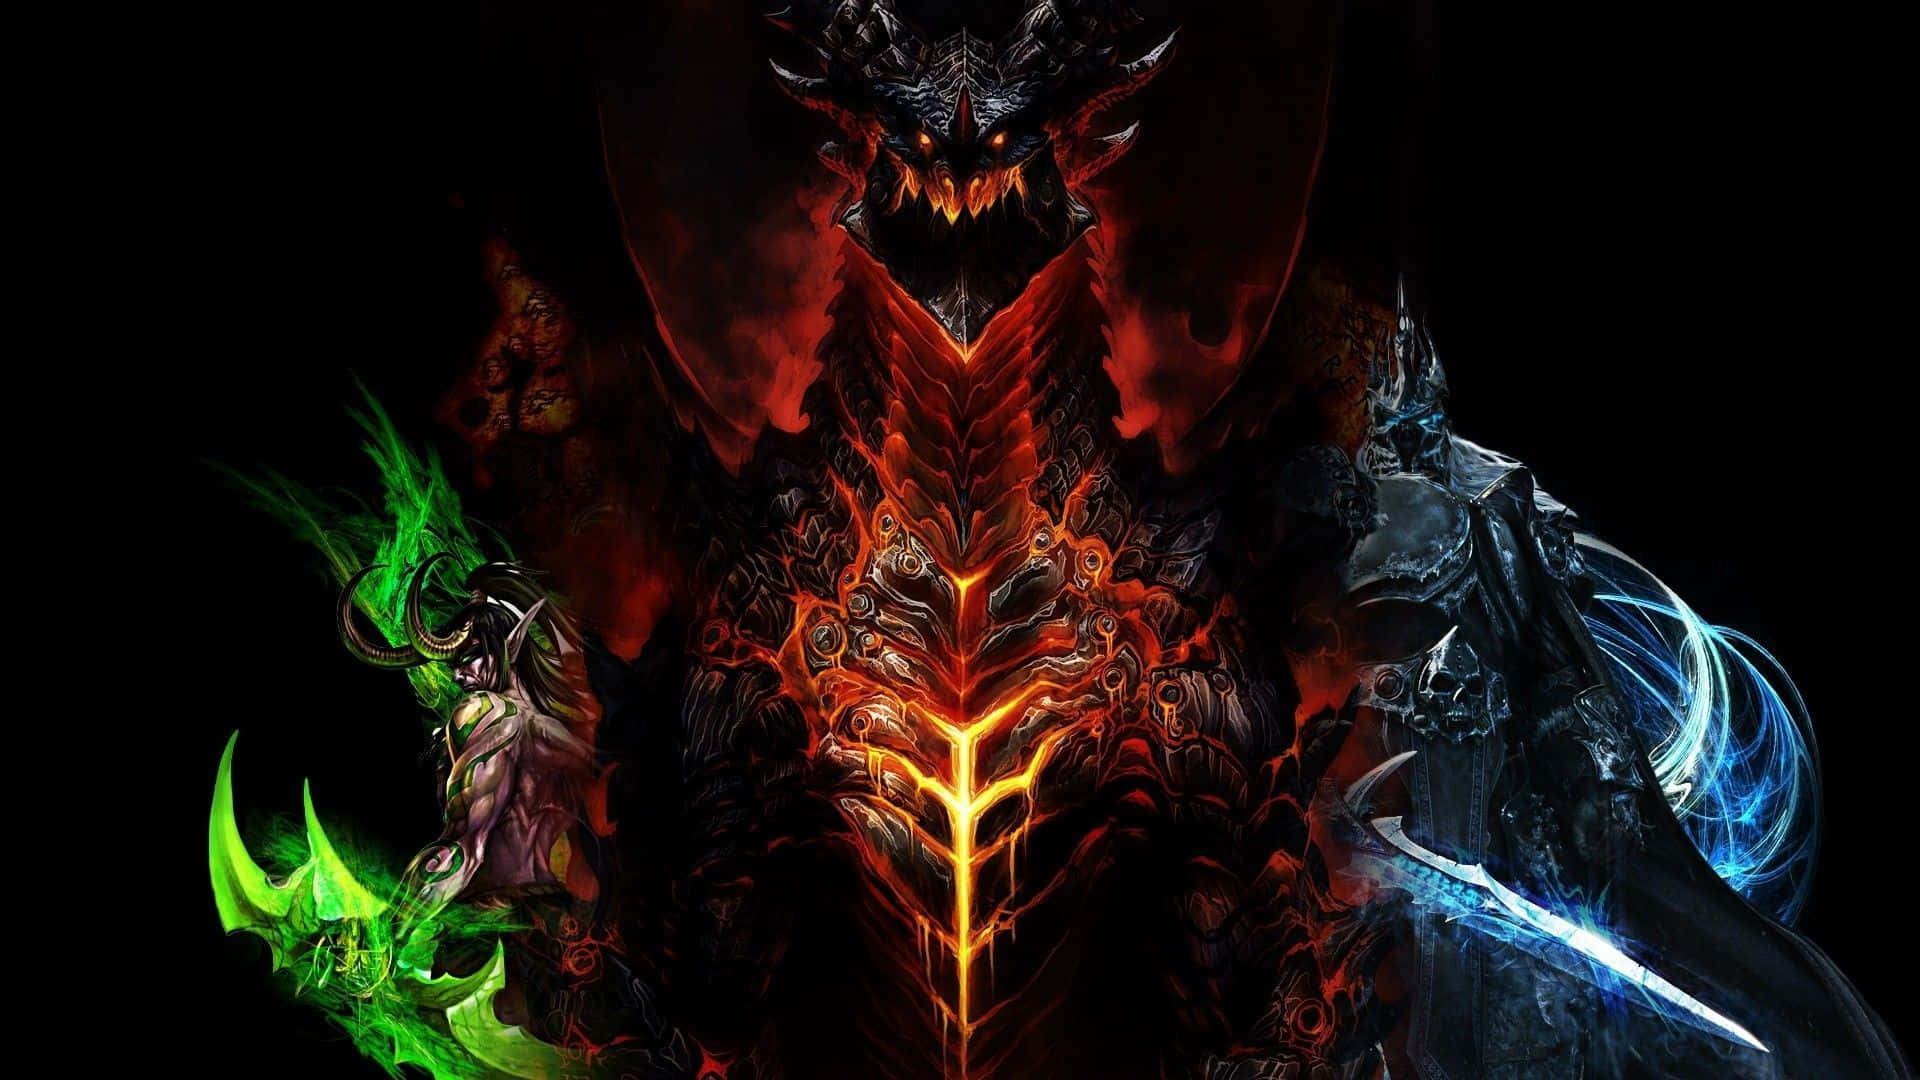 Intimidating Cool Demon with Flaming Swords Wallpaper